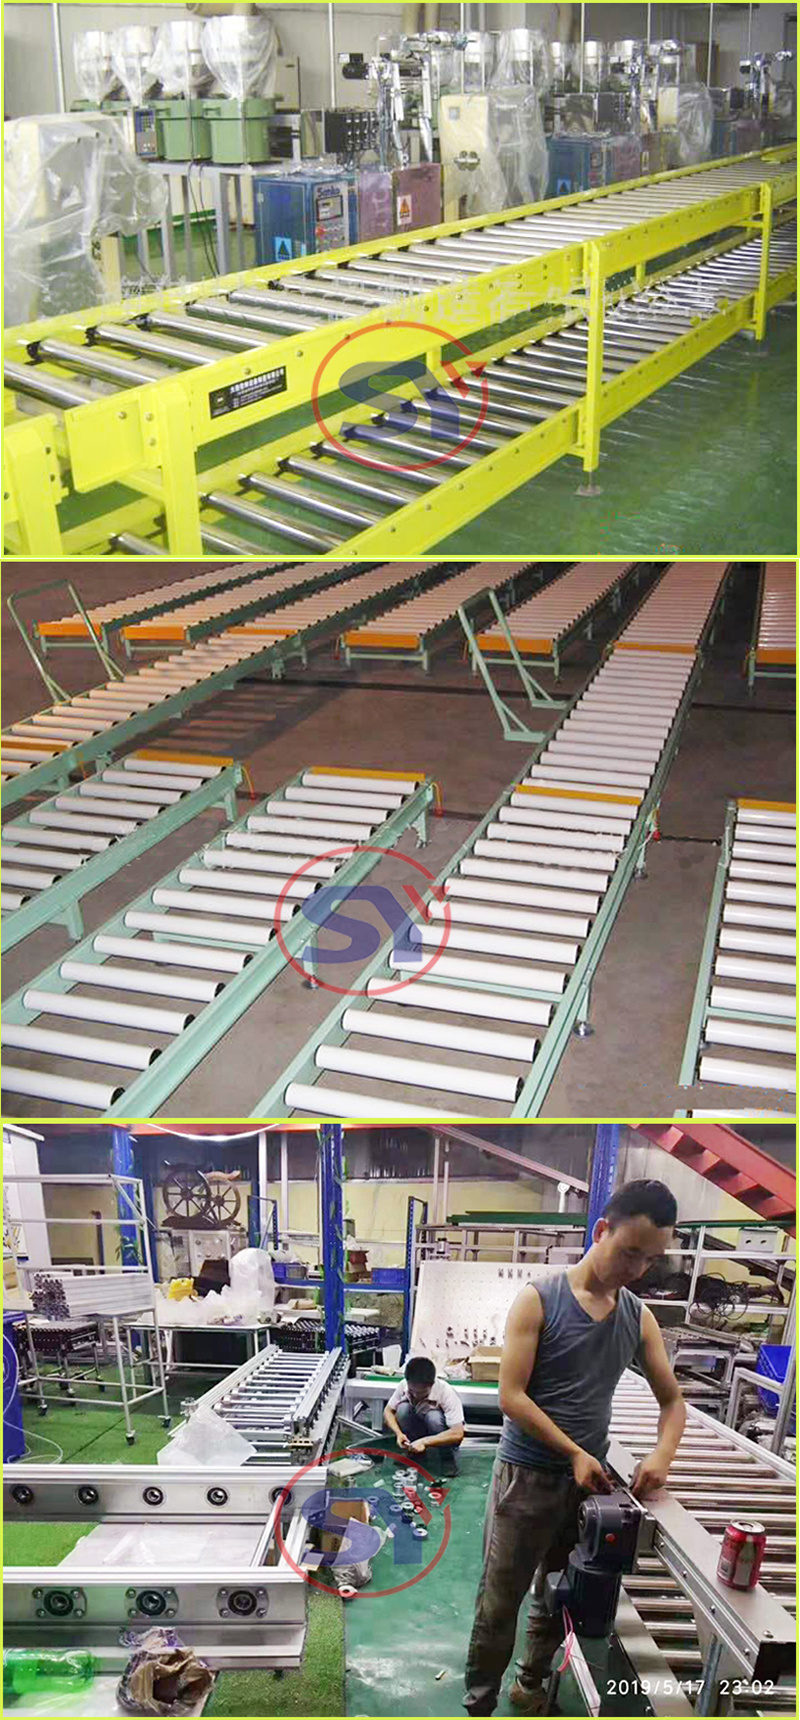 Hand-Push Gravity Inclining Movable Roller Conveyor for Sortation System